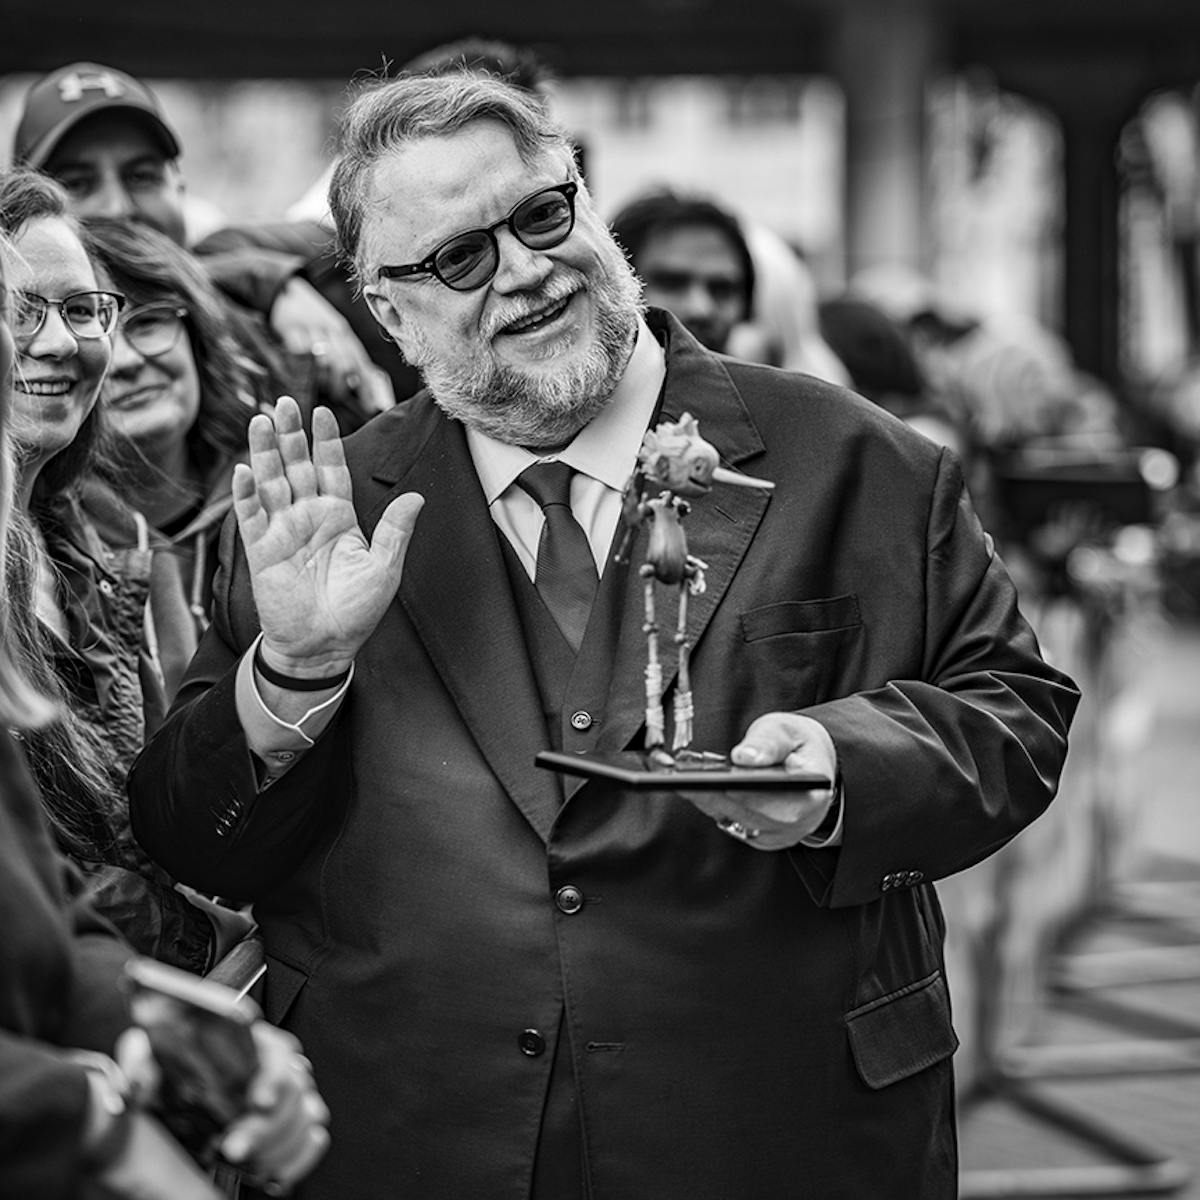 Guillermo del Toro wears a suit and waves from a crowd of people holding a miniature Pinocchio puppet.